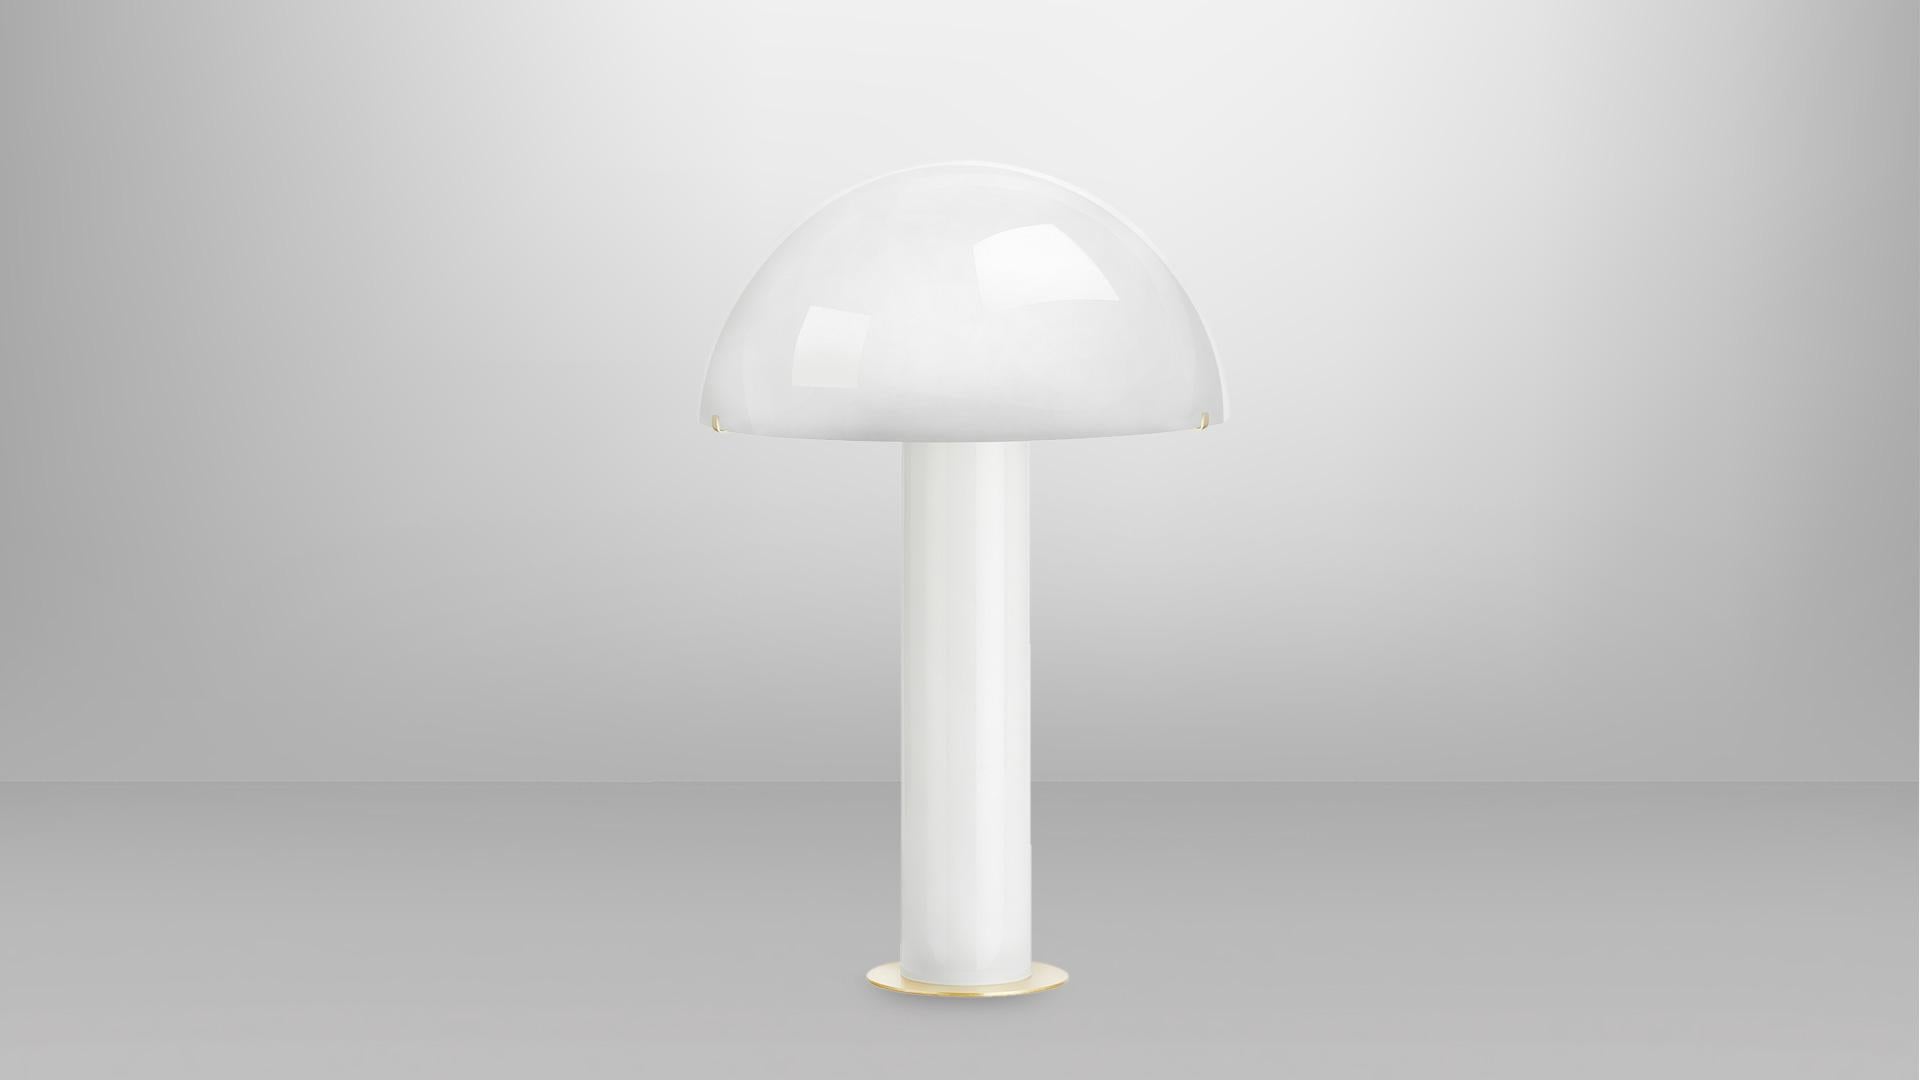 Hanover table lamp by CTO Lighting
Materials: opal white glass, satin brass
Dimensions: 38.5 x H 60 cm

All our lamps can be wired according to each country. If sold to the USA it will be wired for the USA for instance.

2 x E12, 60w max (or 6.5w